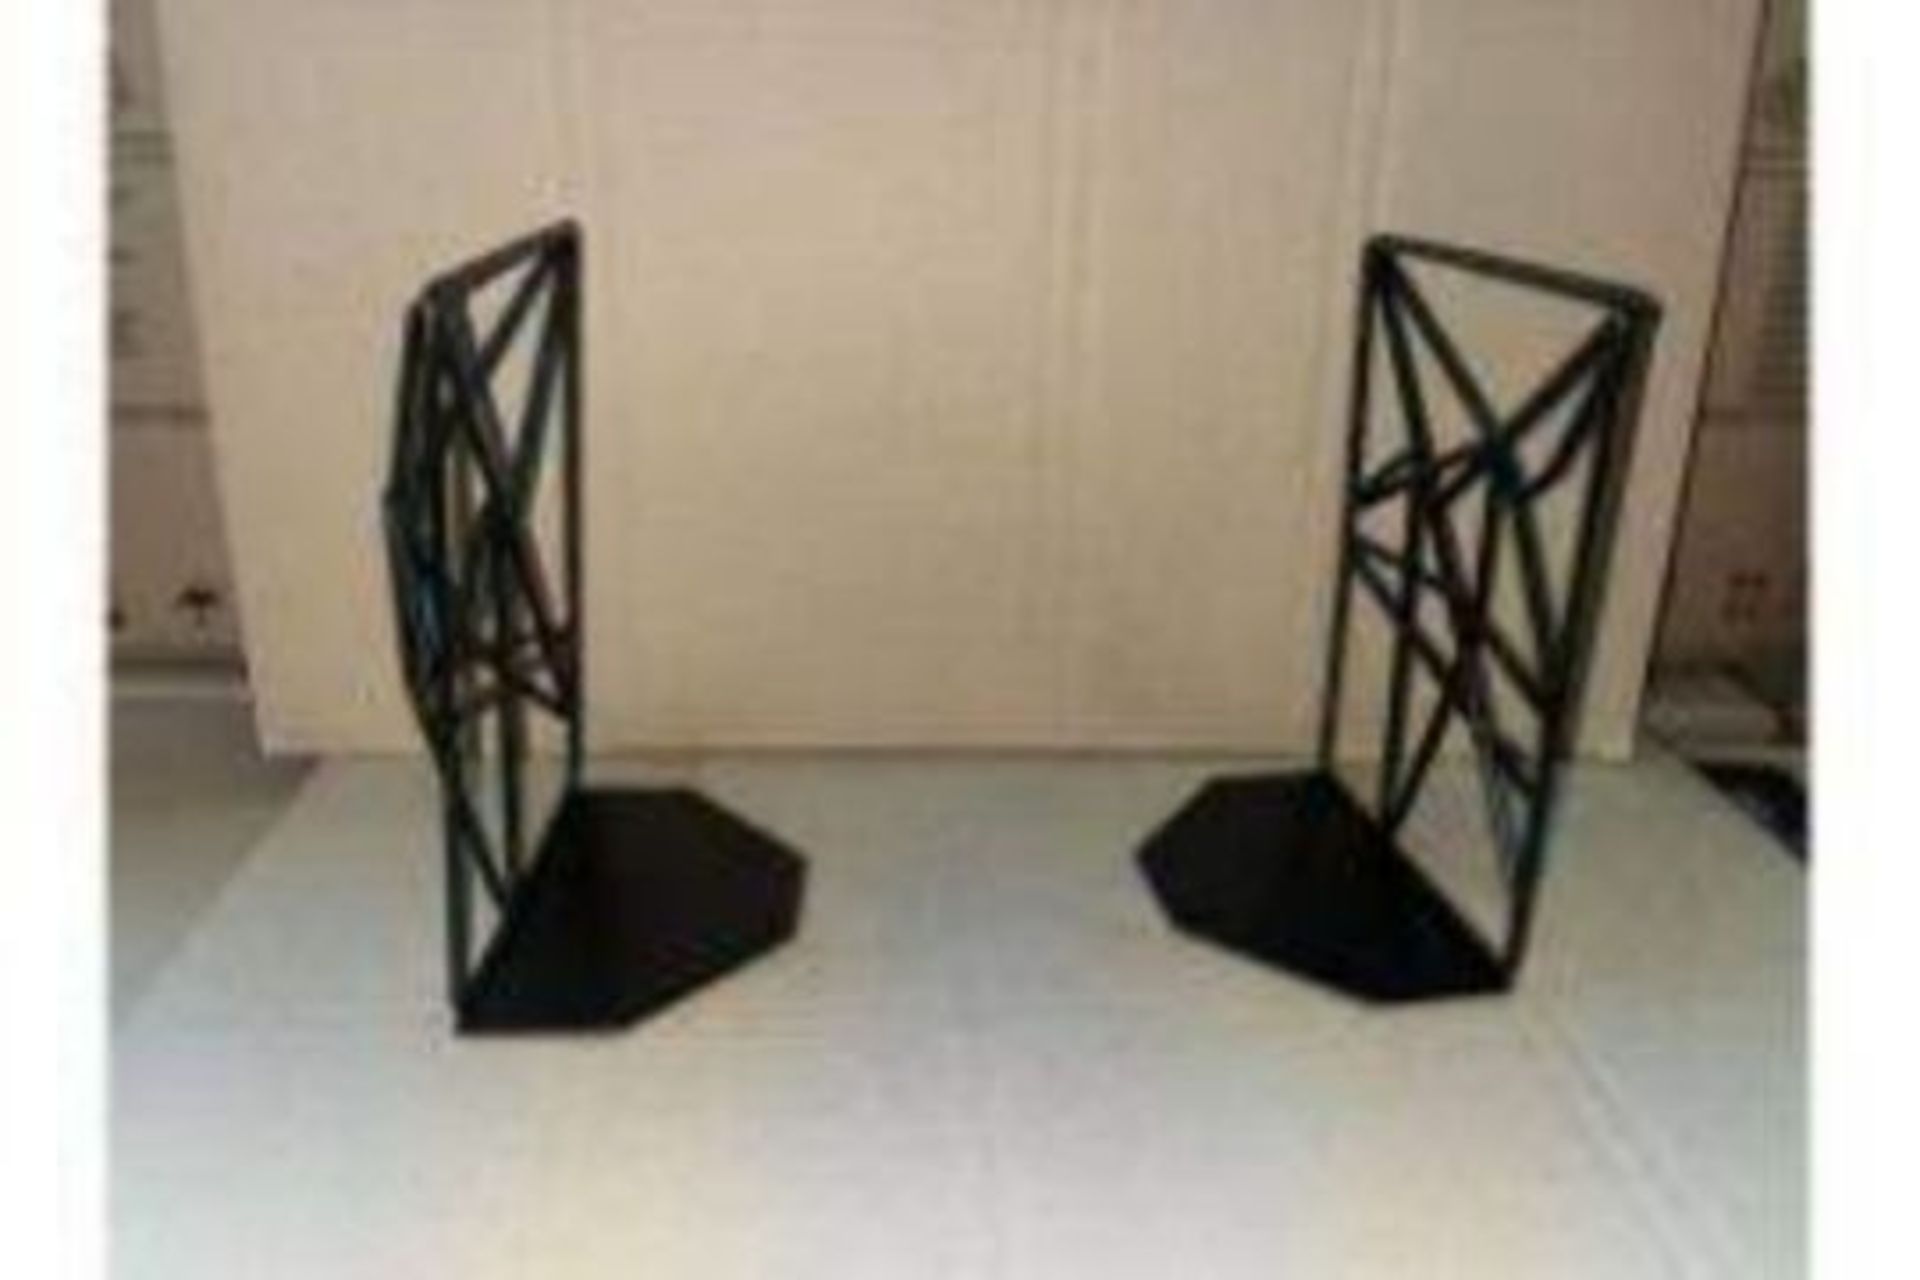 60 X BRAND NEW BLACK GEOMETRIC BOOK ENDS R17 - Image 2 of 2